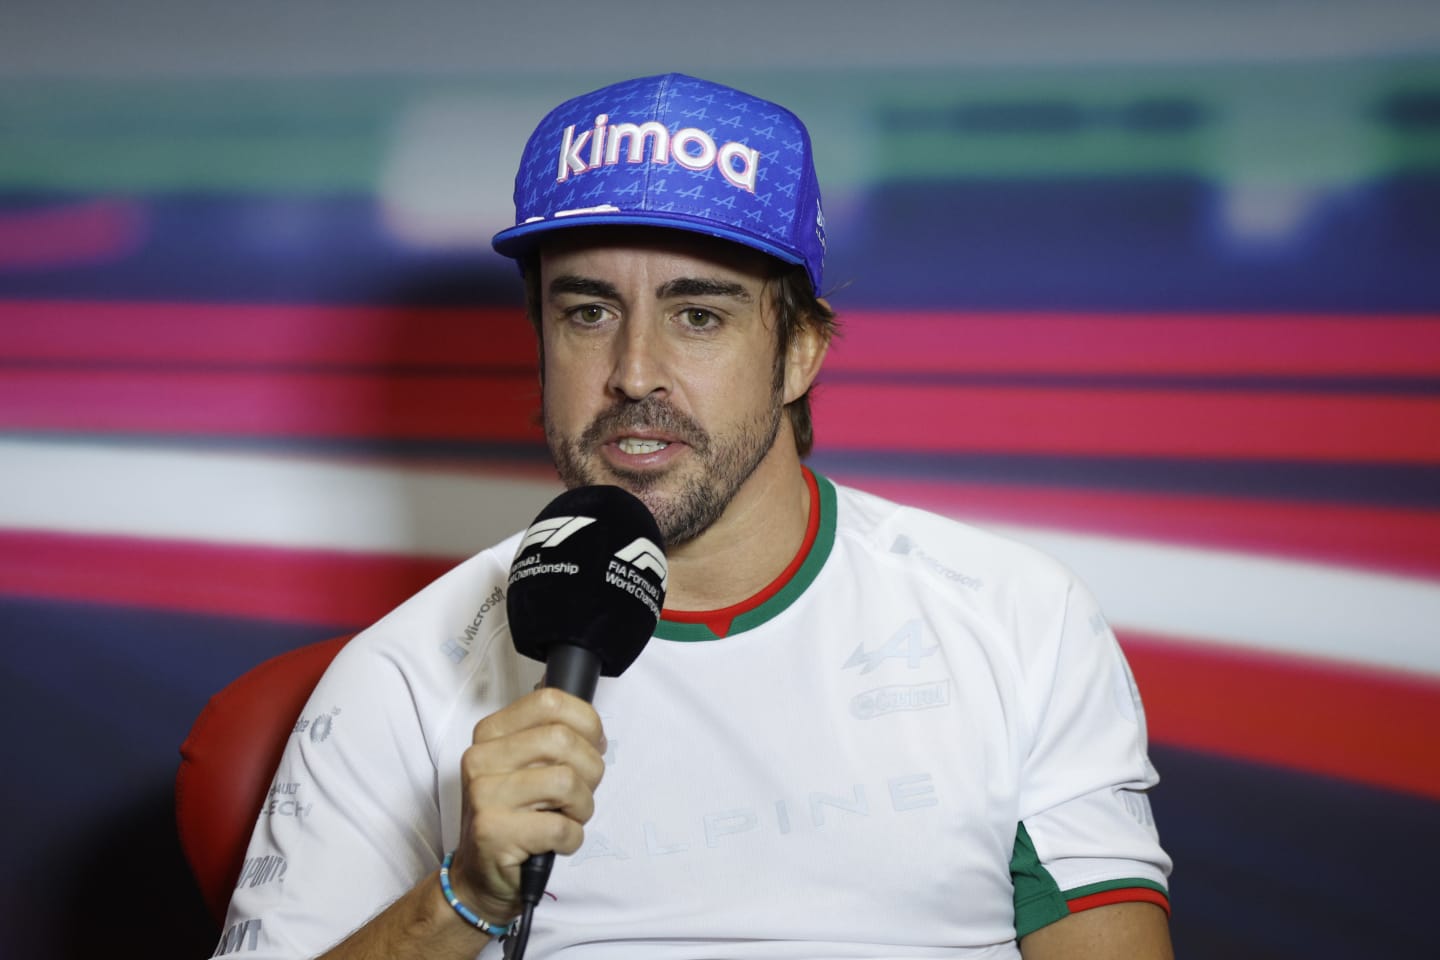 MEXICO CITY, MEXICO - OCTOBER 27: Fernando Alonso of Spain and Alpine F1 attends the Drivers Press